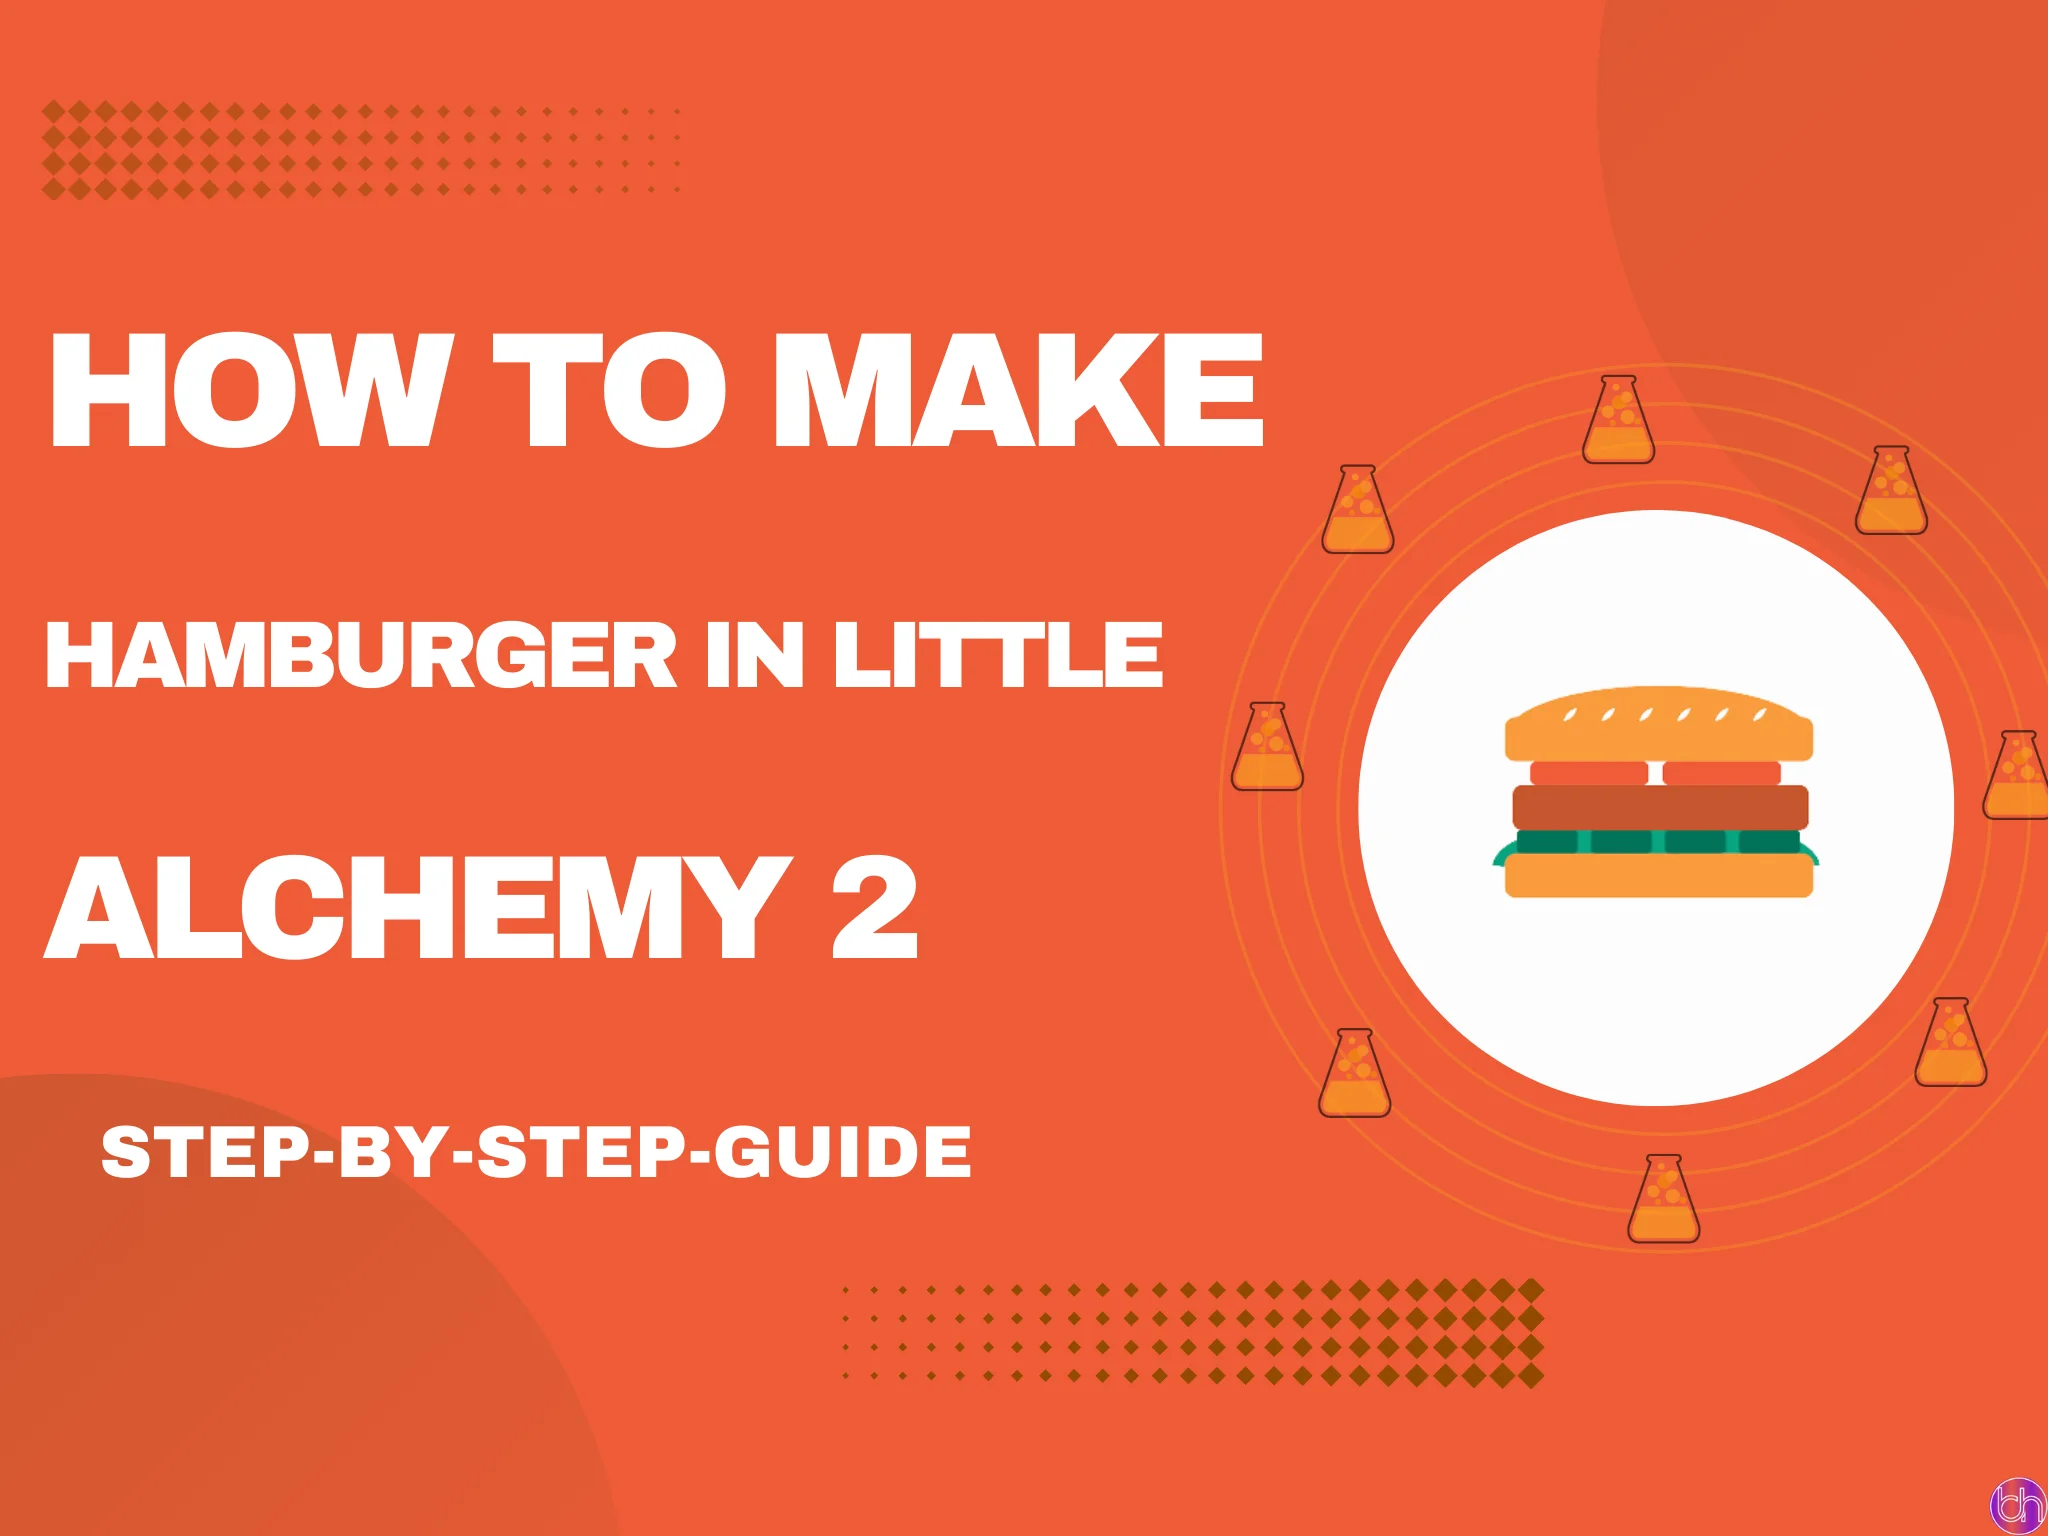 How to make hamburger in little alchemy 2